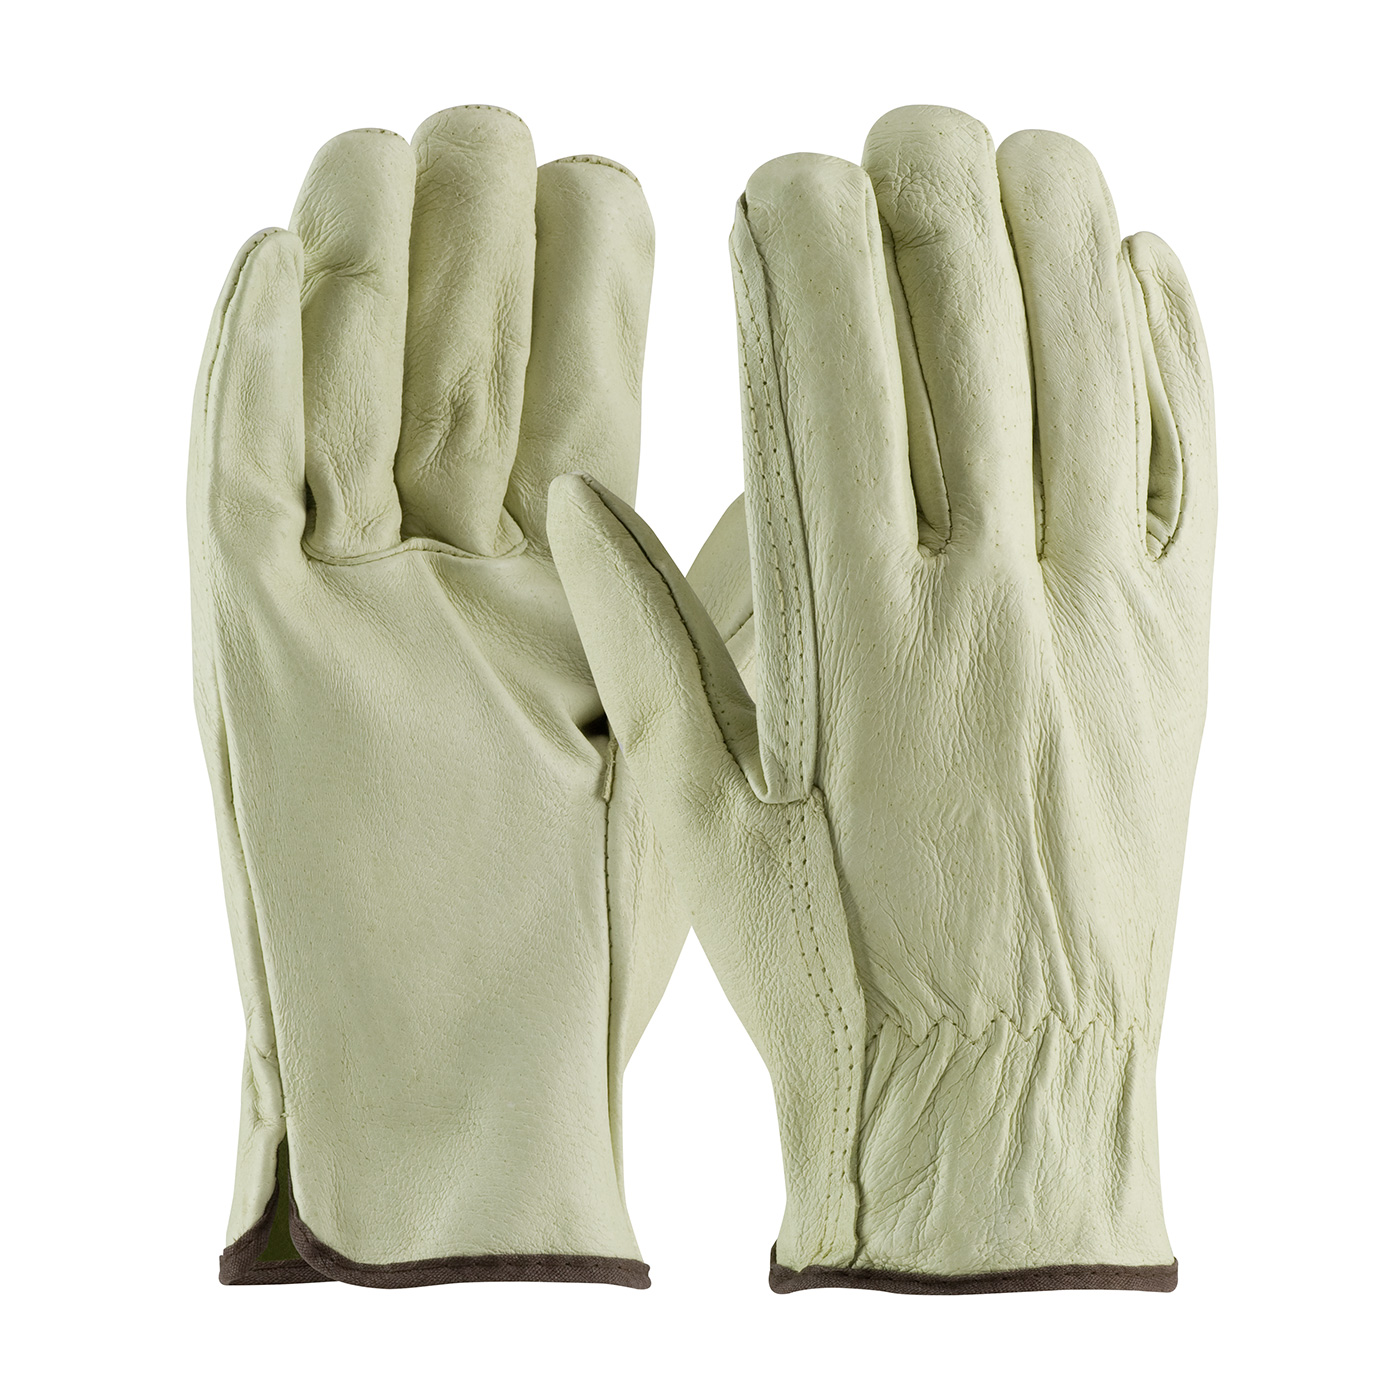 PIP 70-300/S Industry Grade Top Grain Pigskin Leather Drivers Glove - Straight Thumb - Small PID-70-300 S